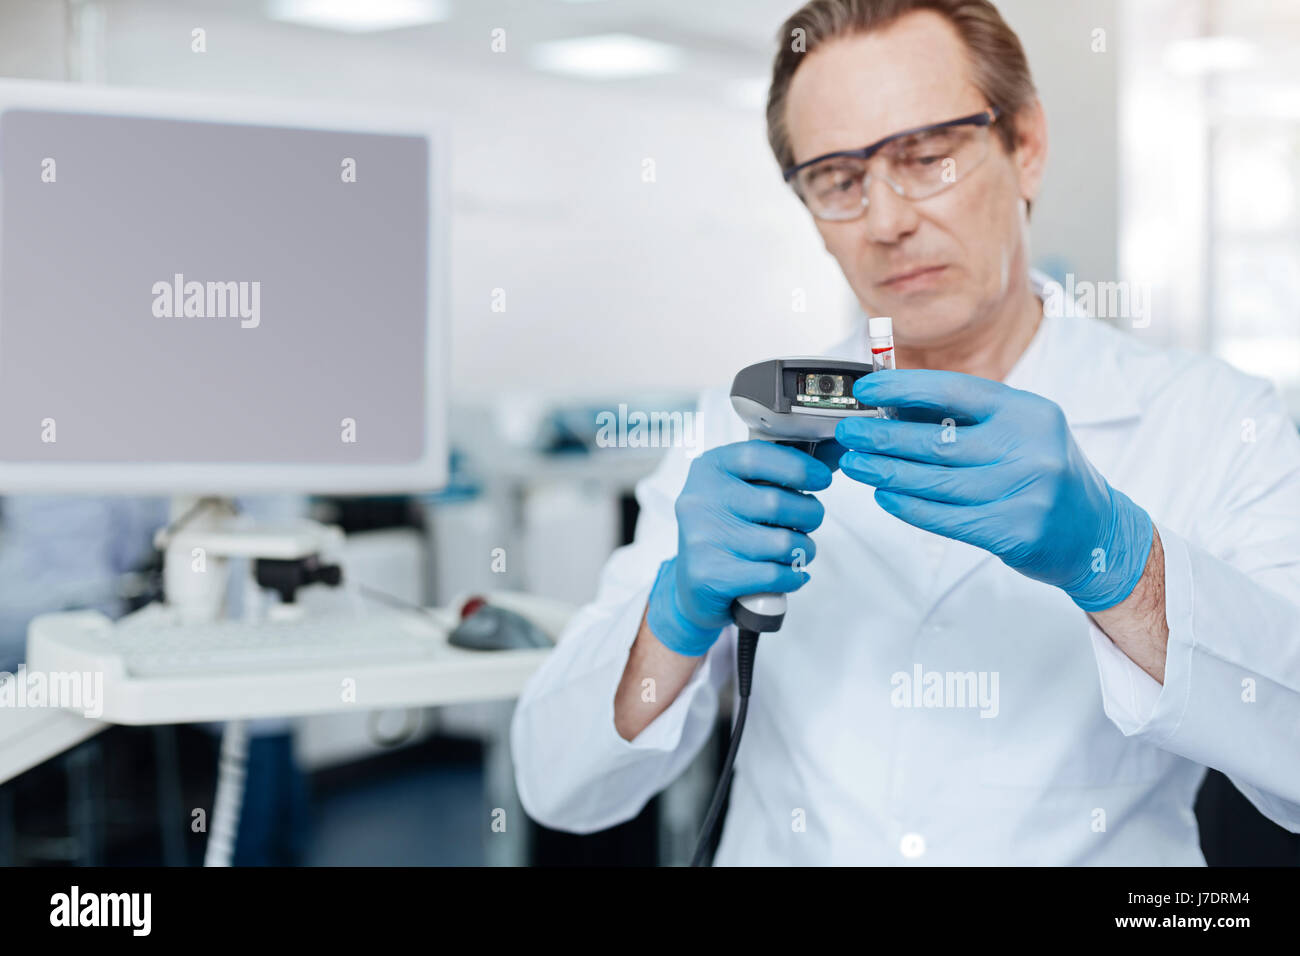 Serious lab assistant looking attentively at test glass Stock Photo